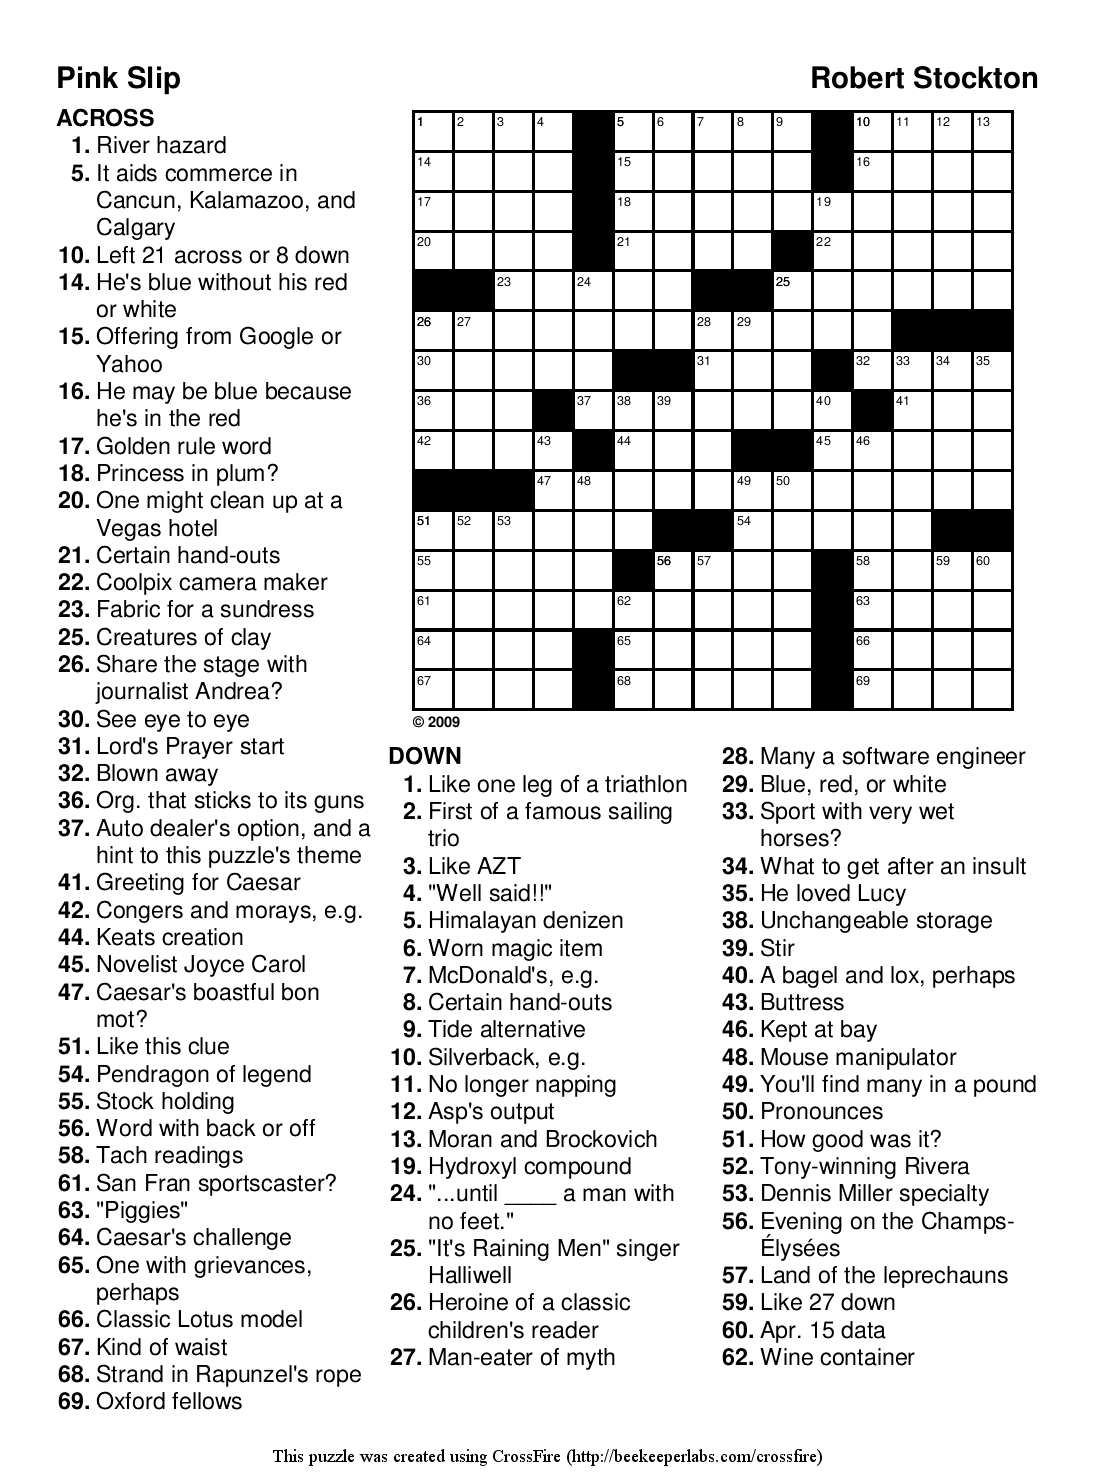 Printable Puzzles For Adults | Easy Word Puzzles Printable Festivals - Printable Crossword Puzzles For Adults With Answers